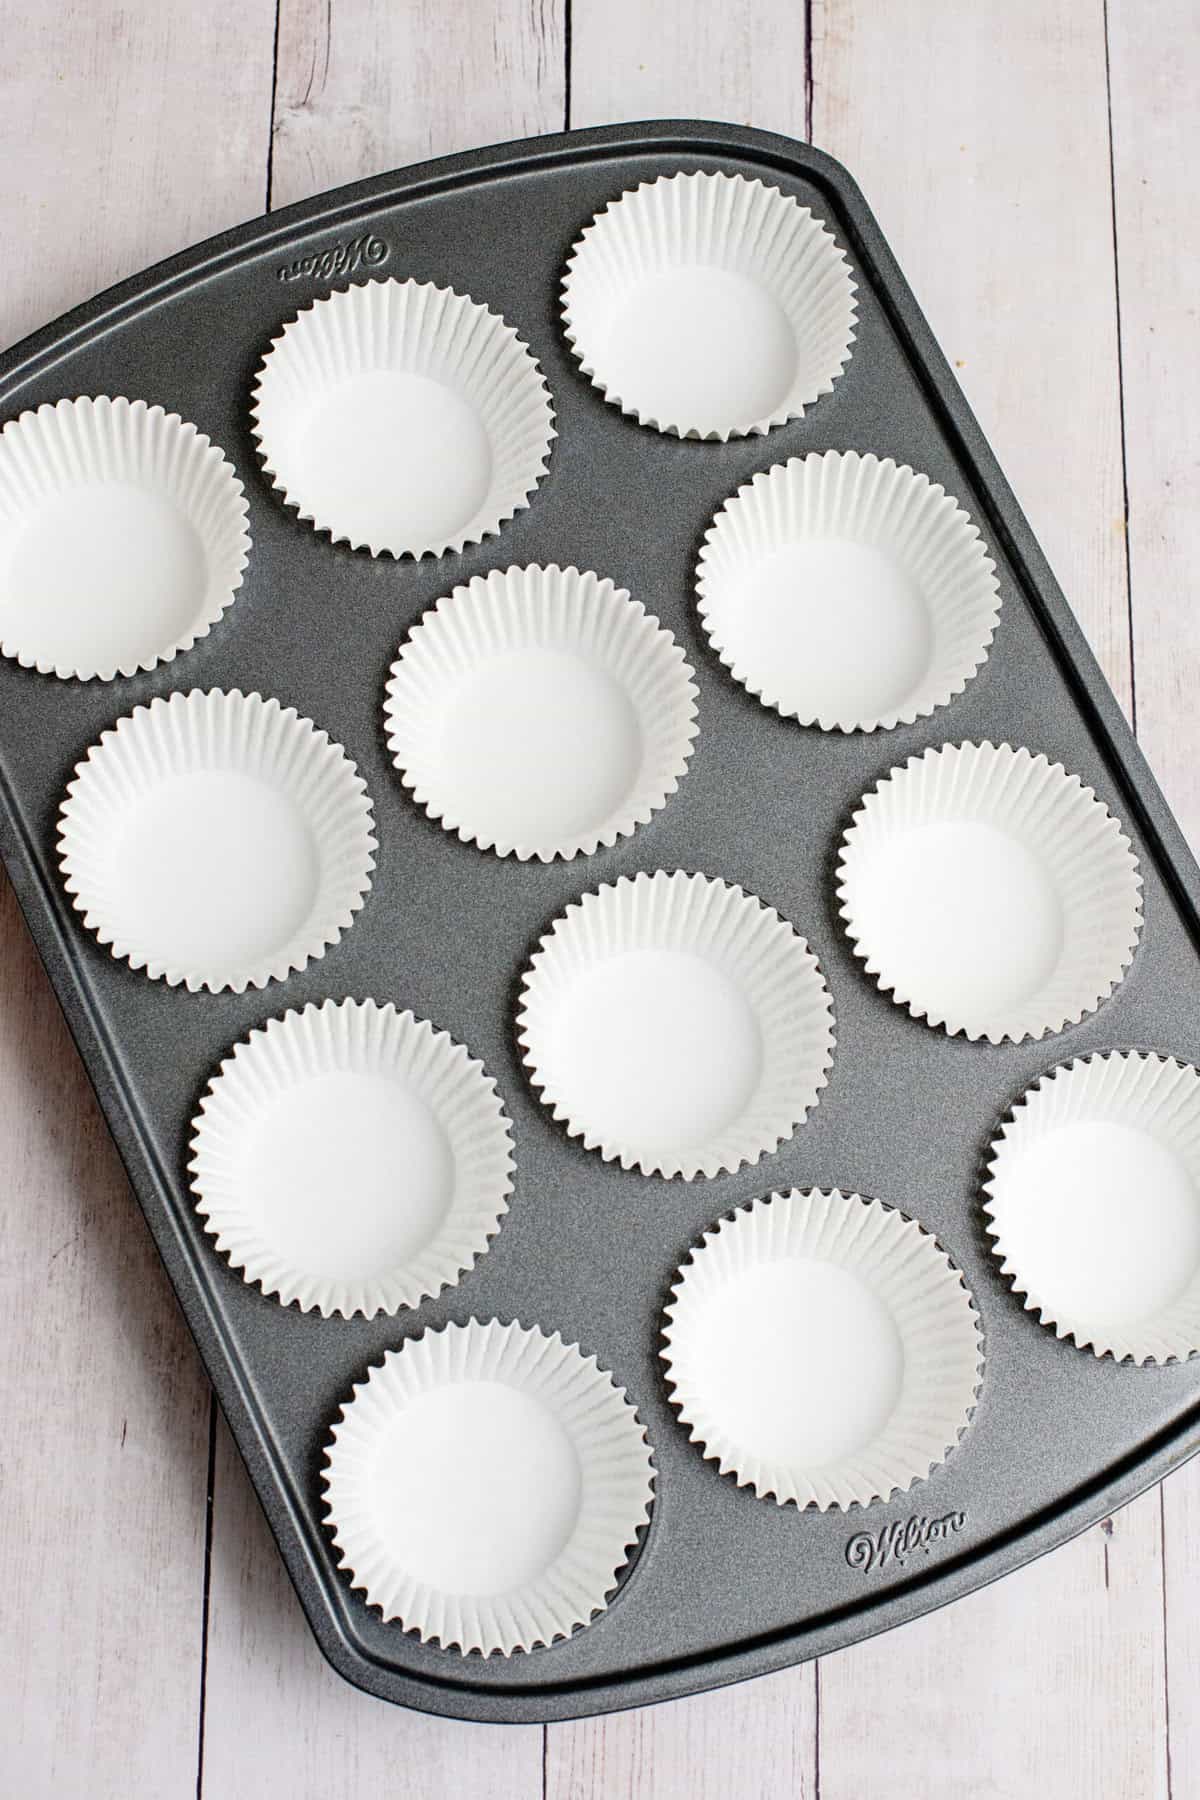 line a muffin tin with liners and set aside